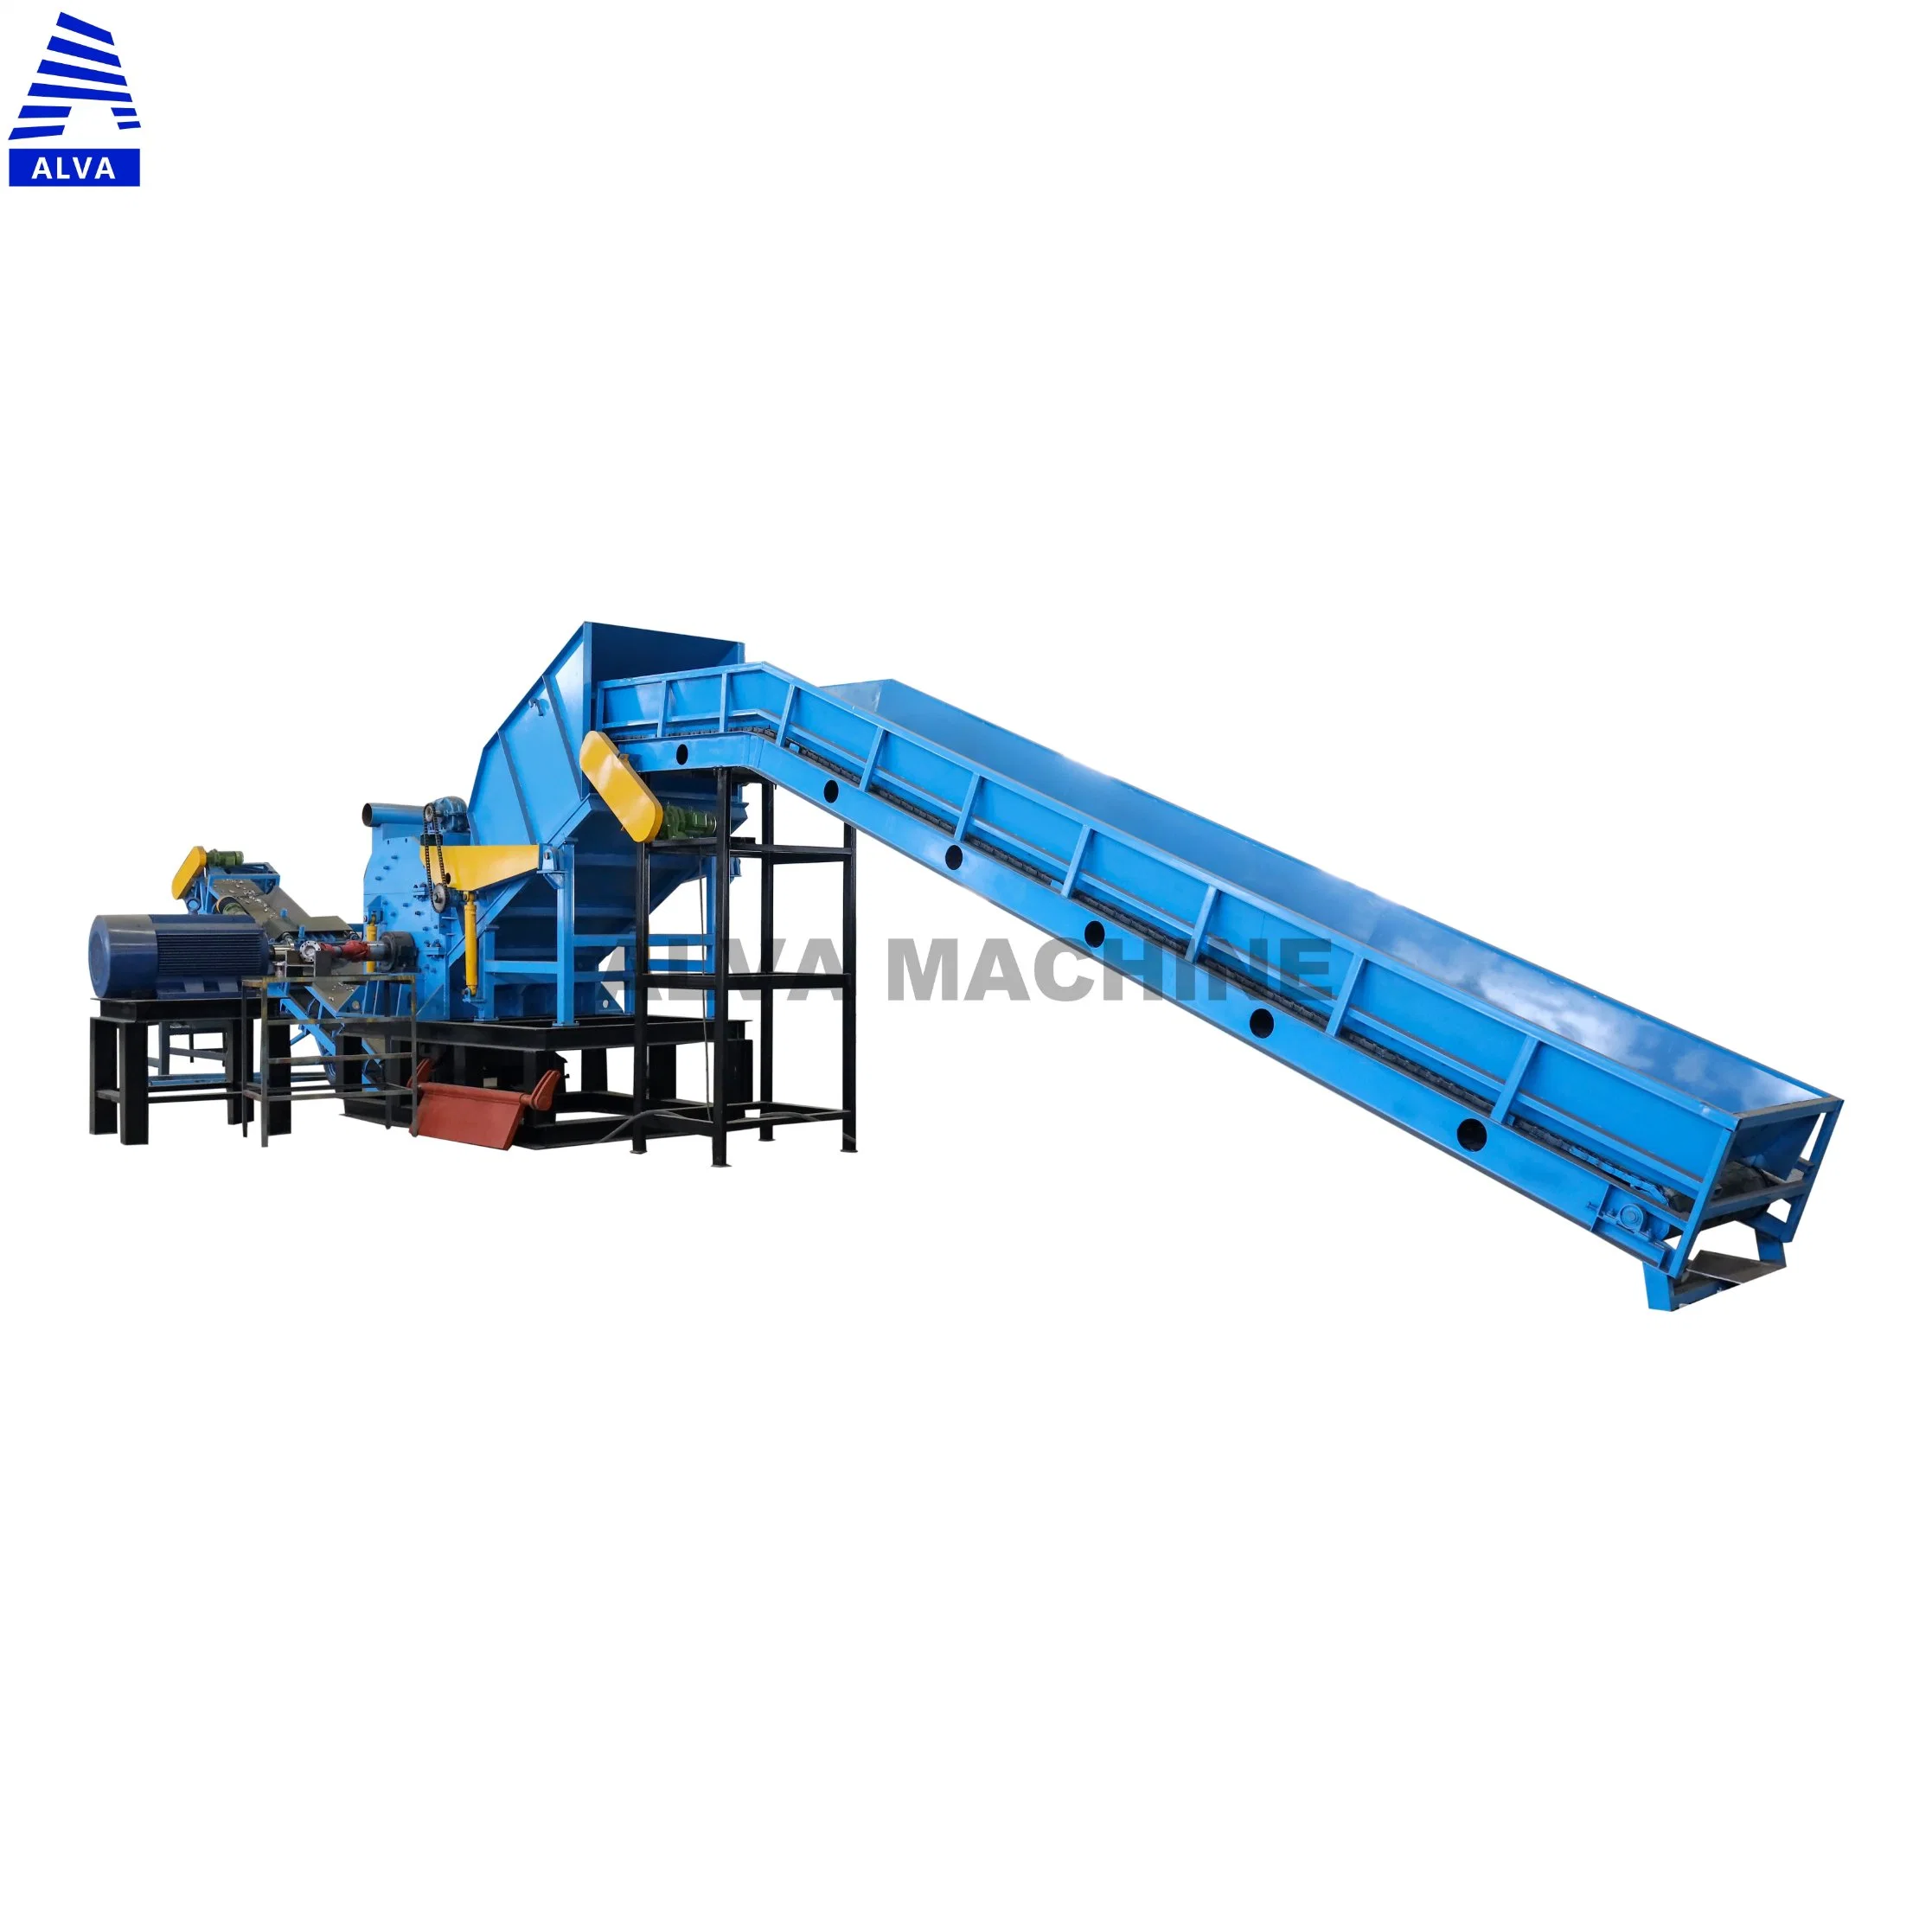 China Alva Machine Made in China Electric Motor Stator Recycling Machine /Hammer Mill Metal Shredder with CE